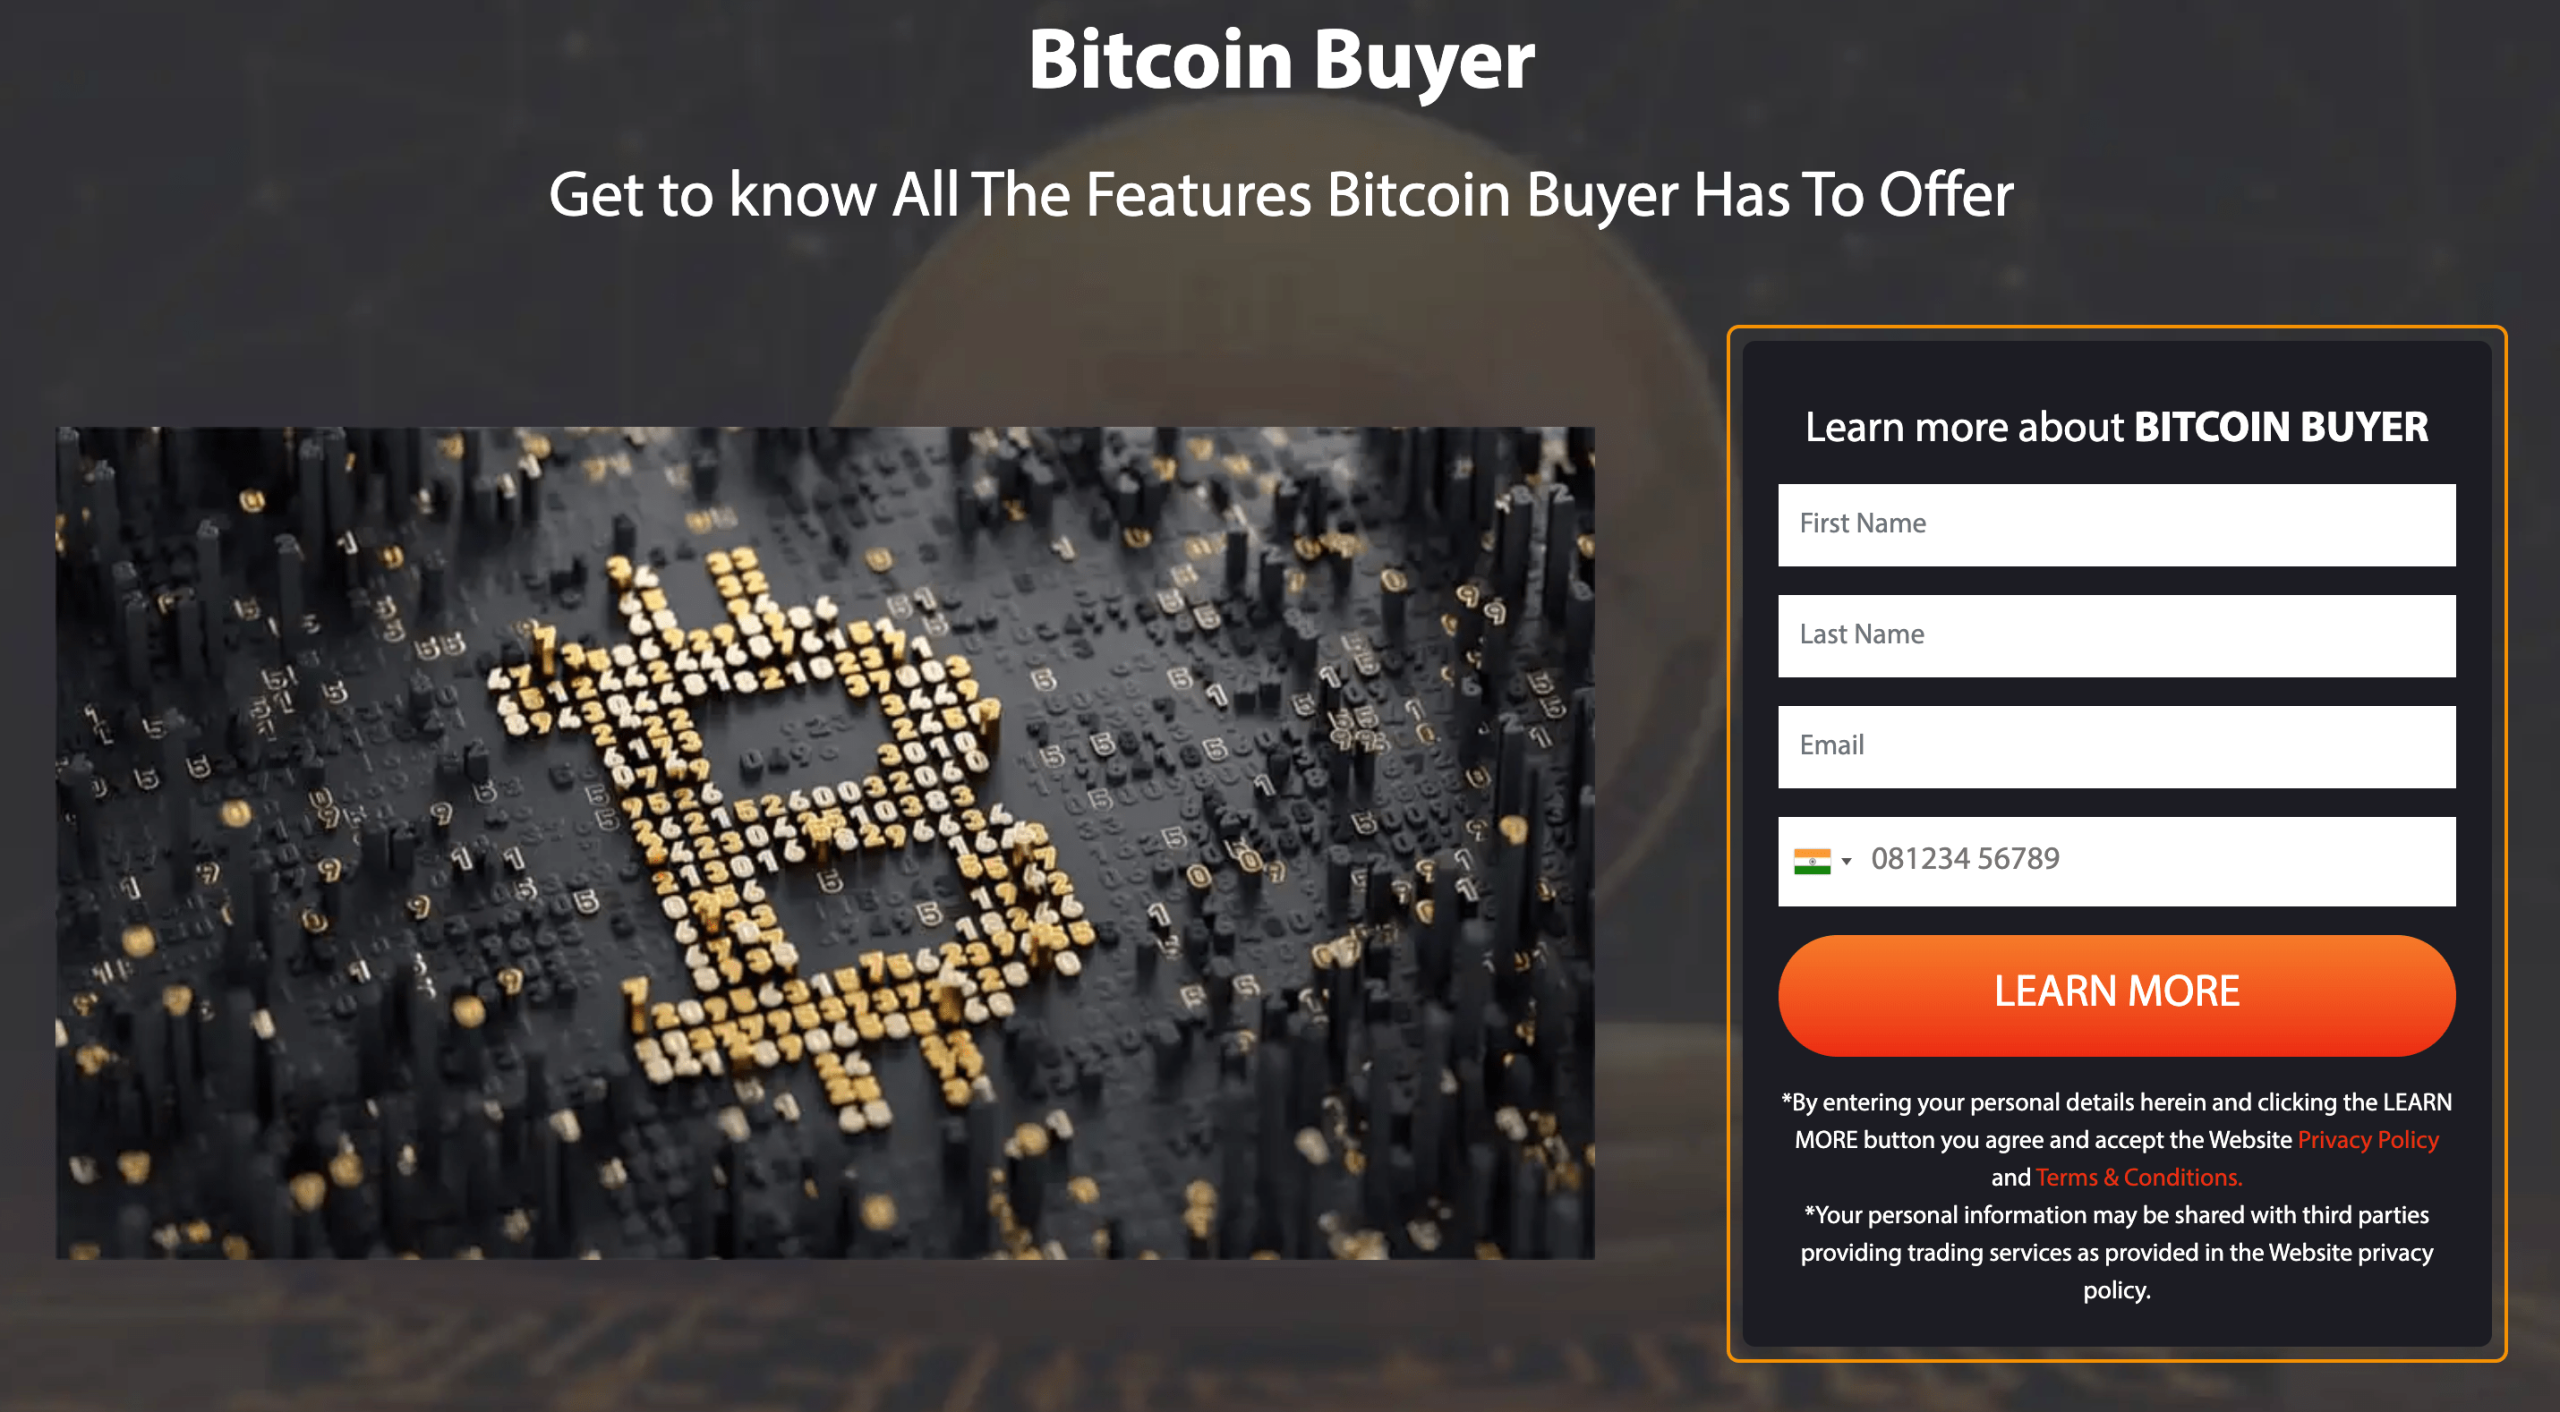 Bitcoin Buyer Review